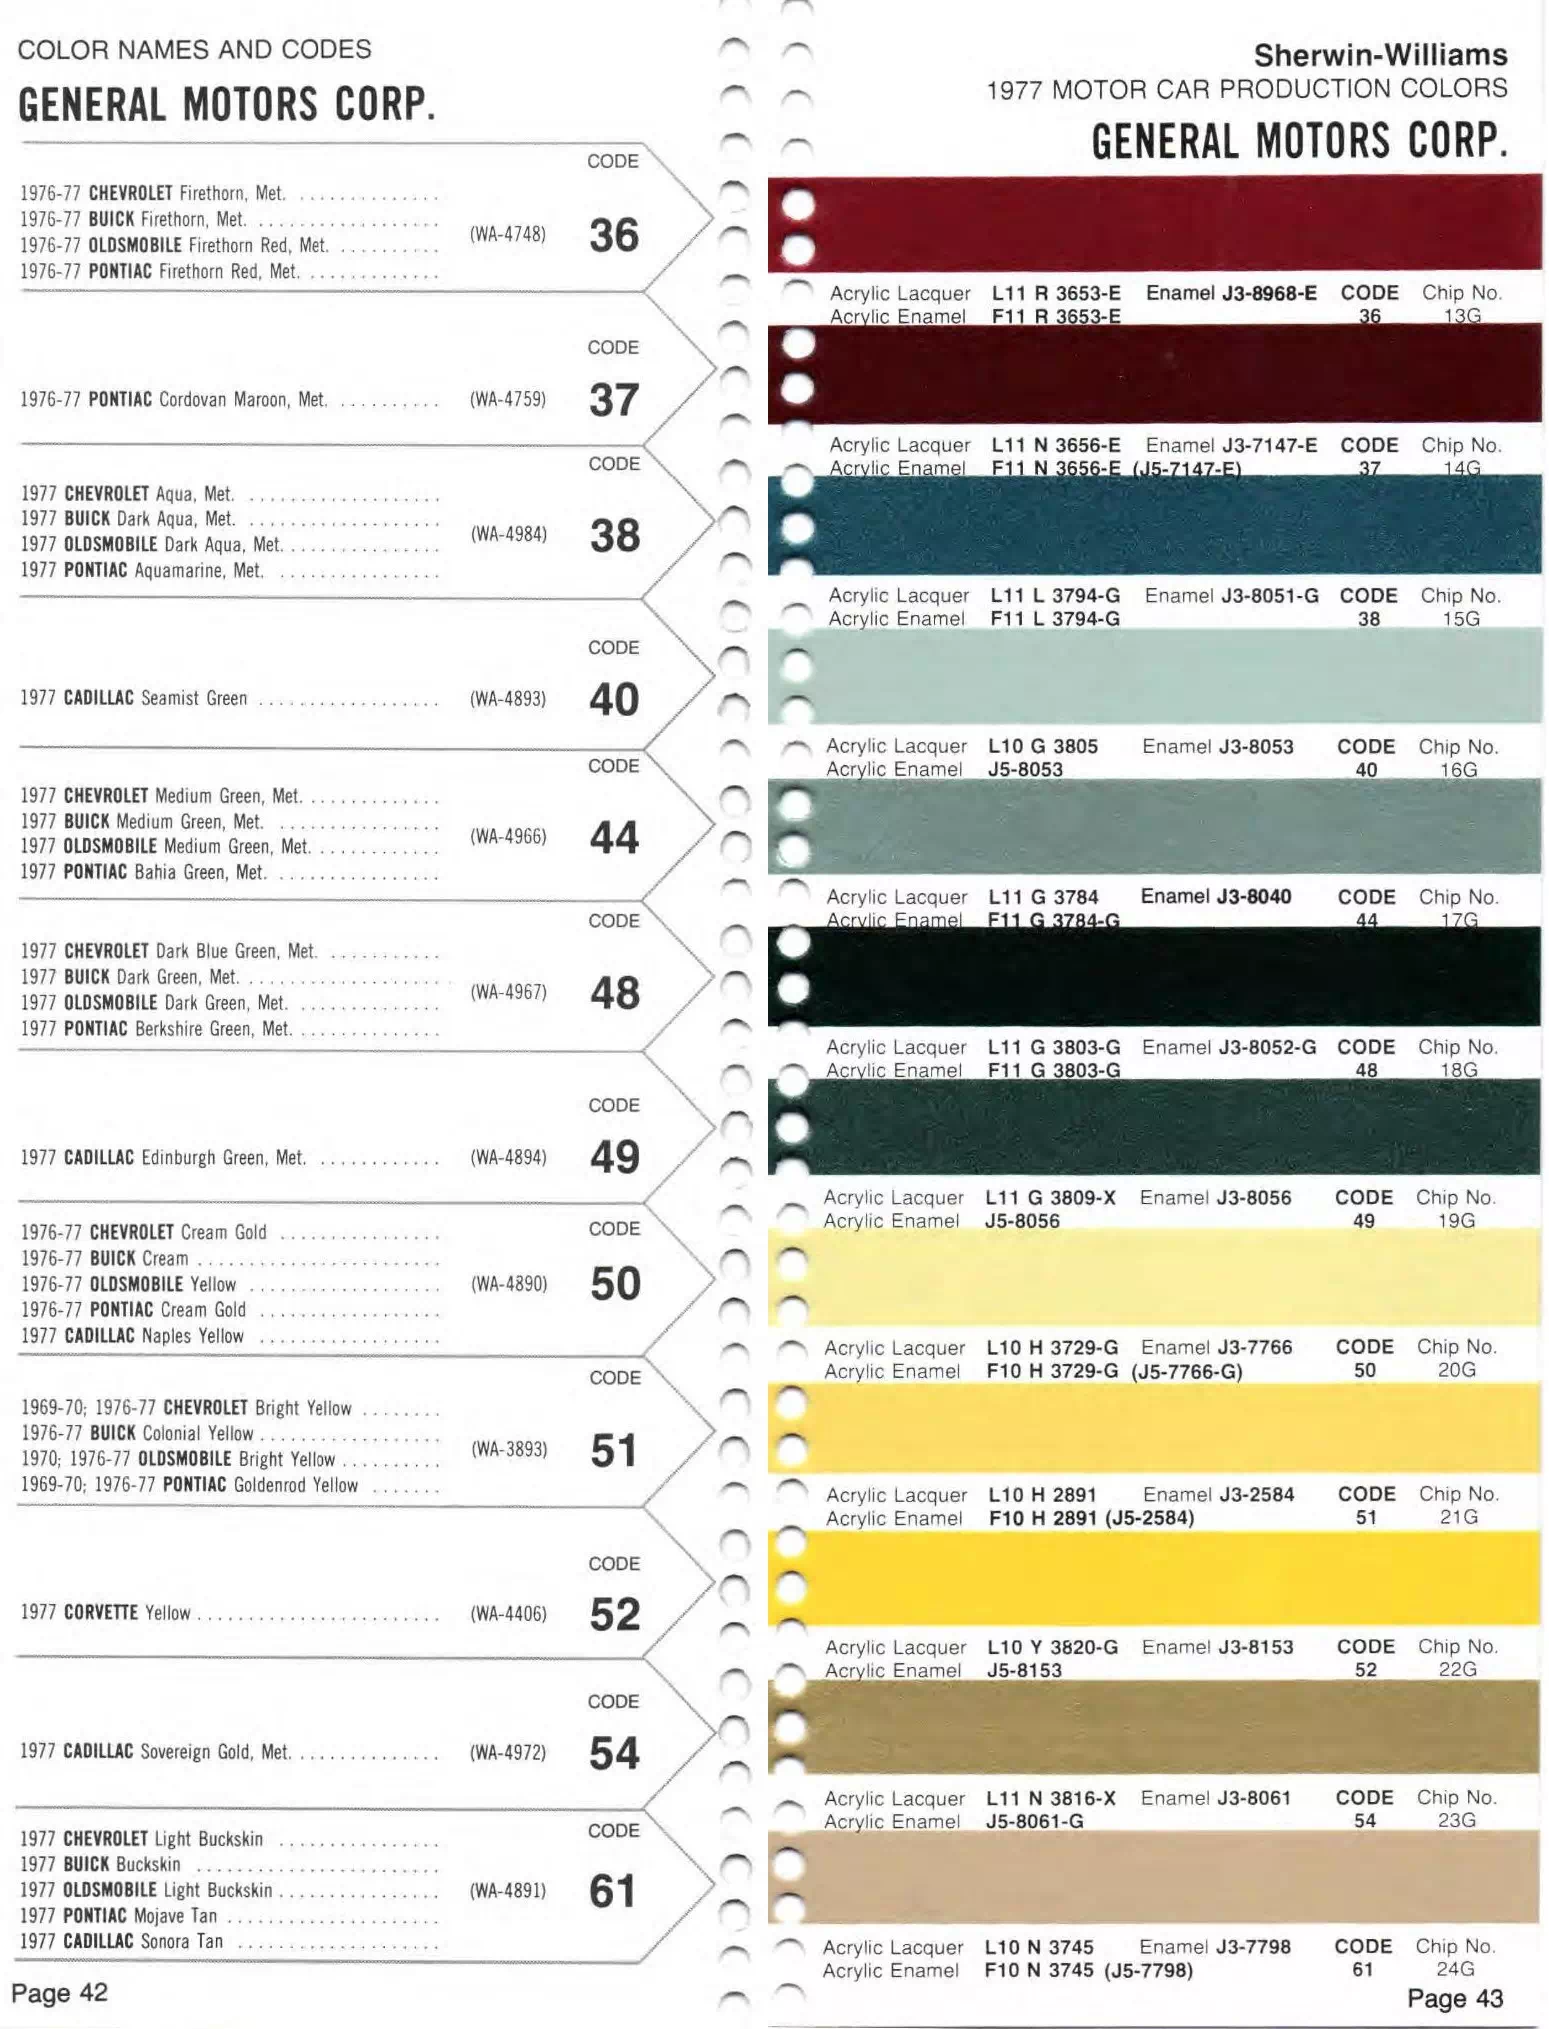 Colors, Descriptions, Codes, and Paint Swatches for General Motors Vehicles in 1977